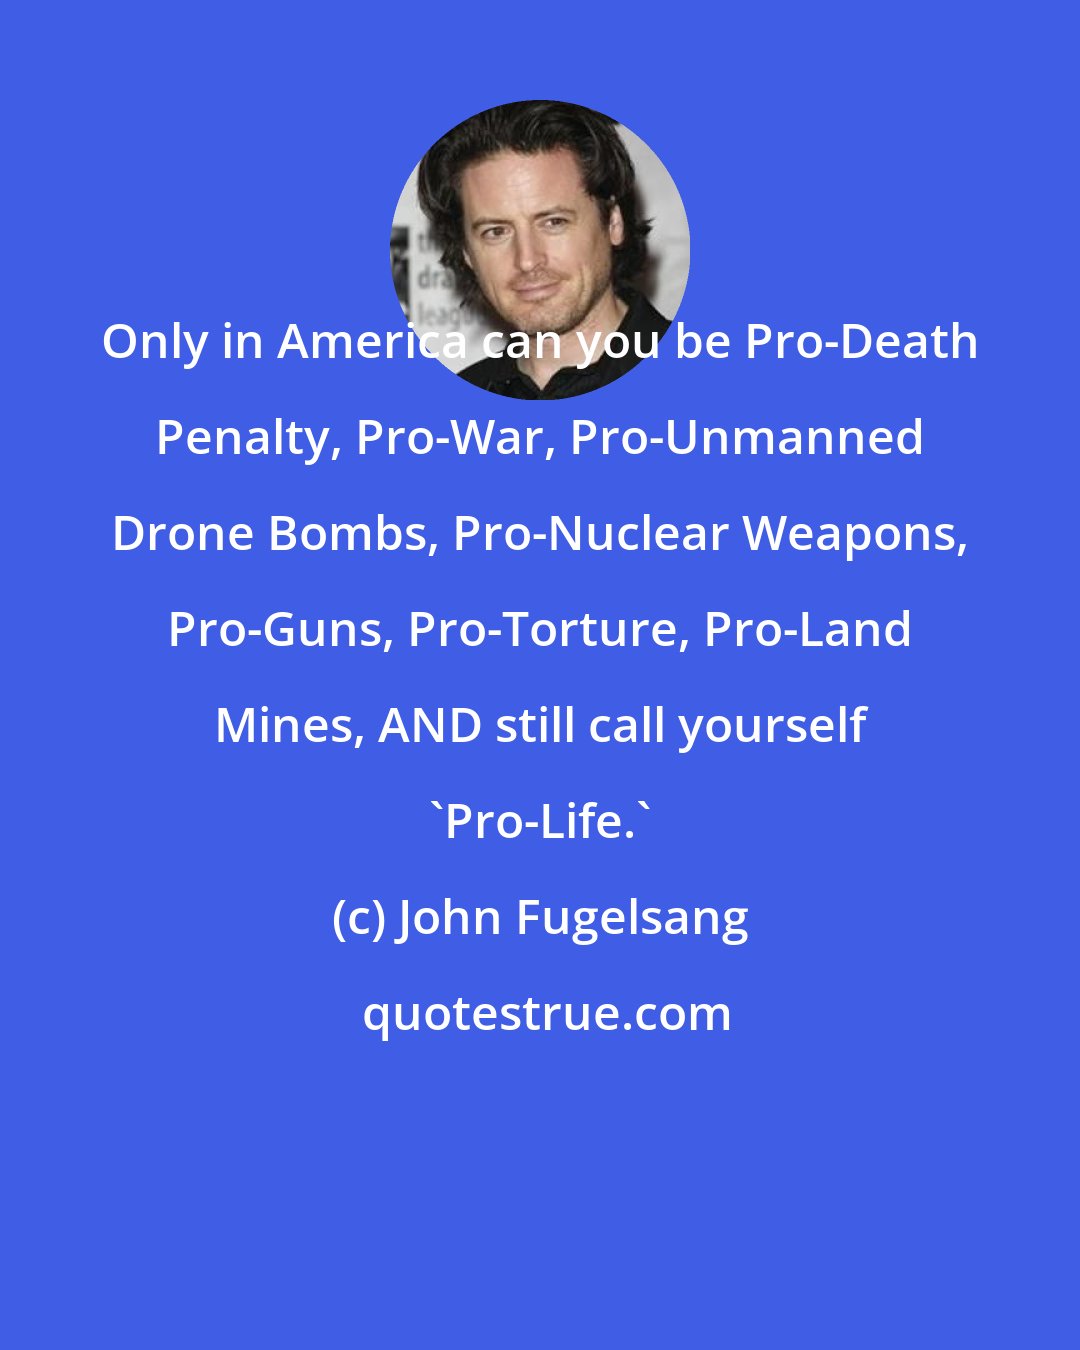 John Fugelsang: Only in America can you be Pro-Death Penalty, Pro-War, Pro-Unmanned Drone Bombs, Pro-Nuclear Weapons, Pro-Guns, Pro-Torture, Pro-Land Mines, AND still call yourself 'Pro-Life.'